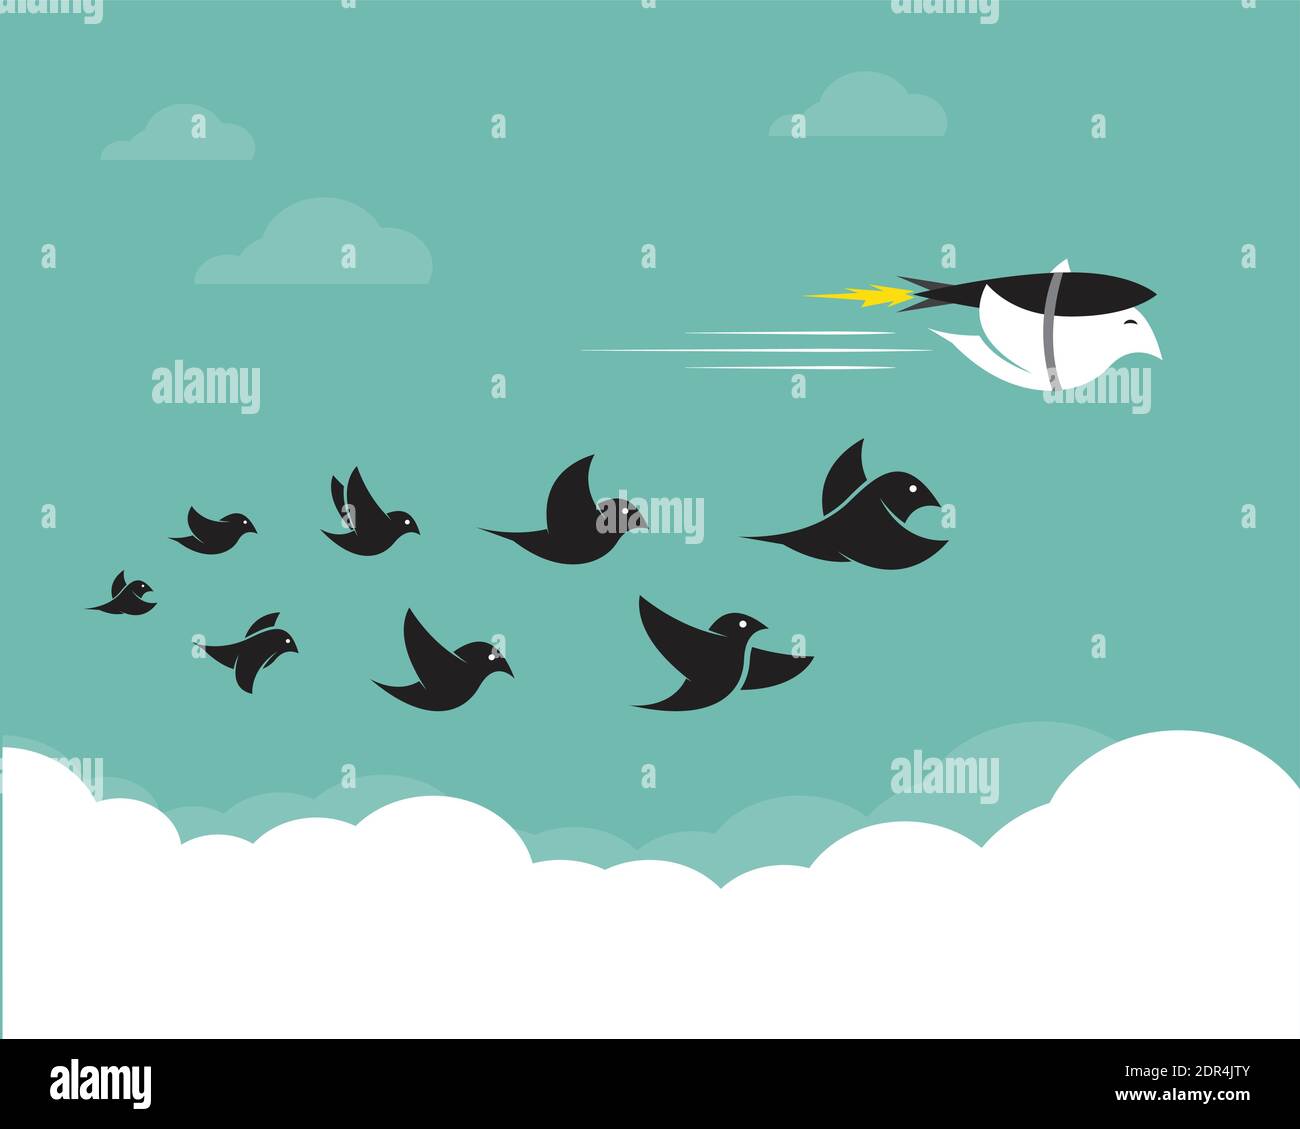 Vector images of birds and rockets in the sky. Concept creative. Easy editable layered vector illustration. Wild Animals. Stock Vector